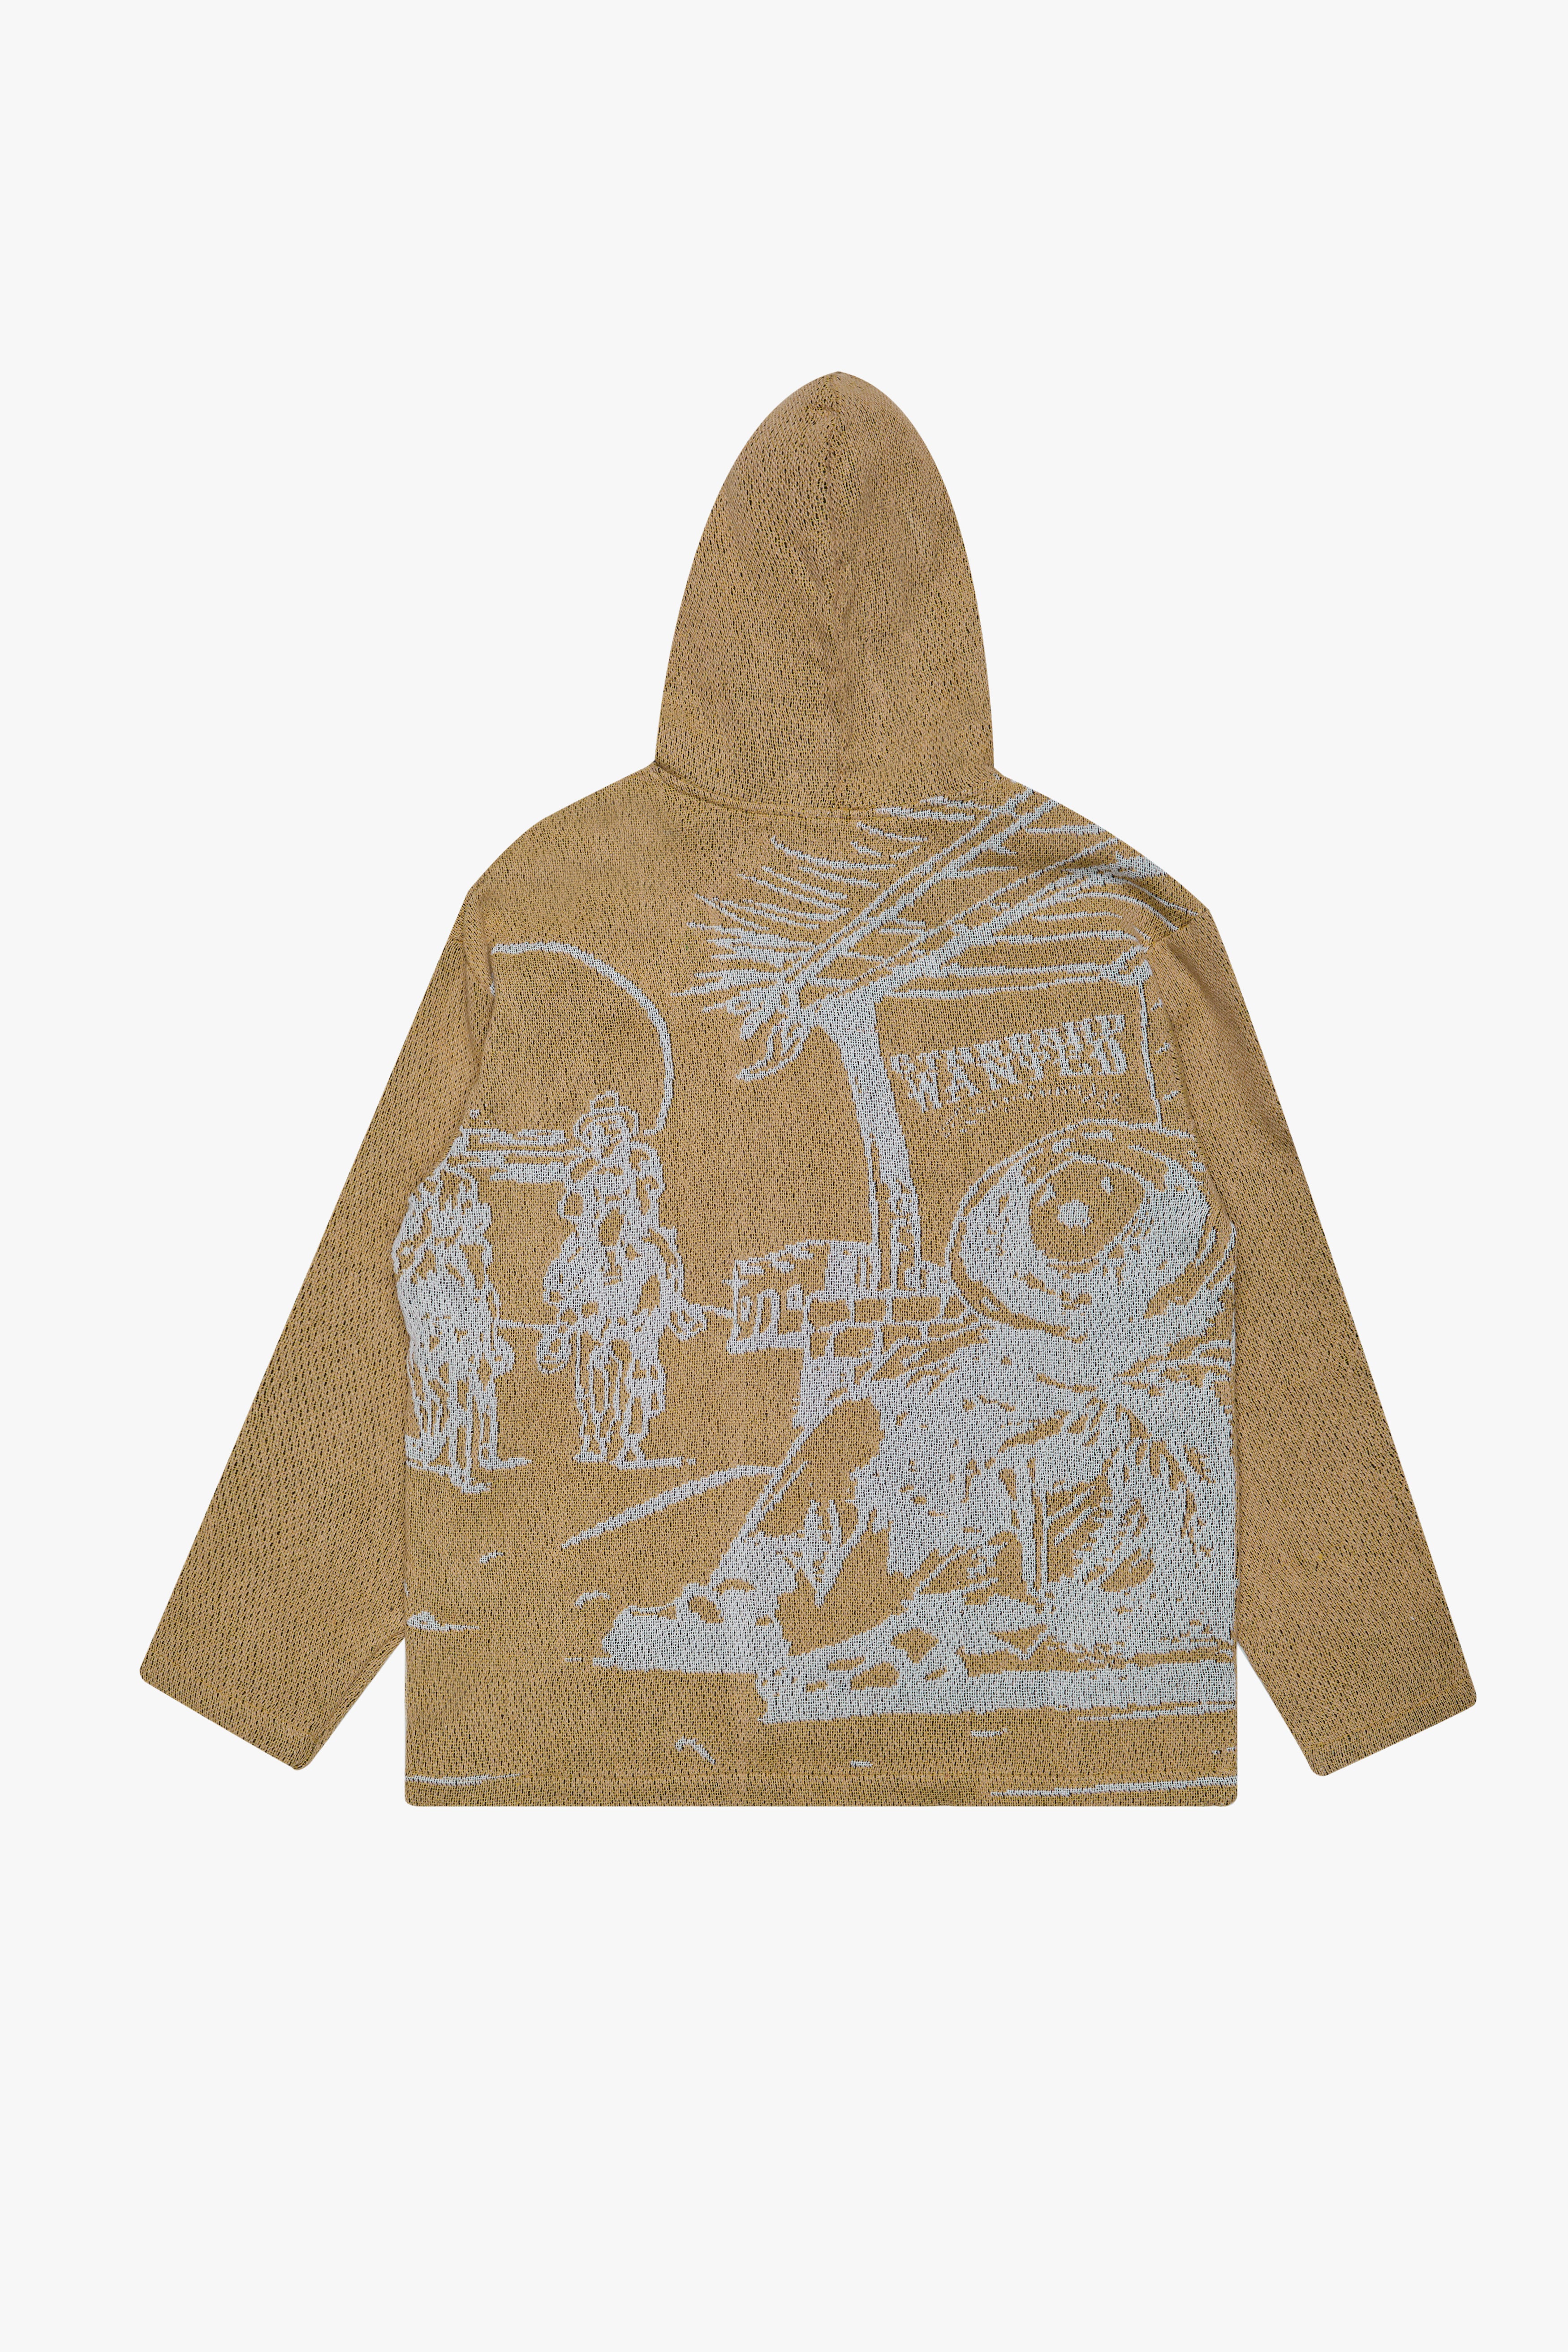 6thNBRHD TAPESTRY PULLOVER "TOWN" WHEAT